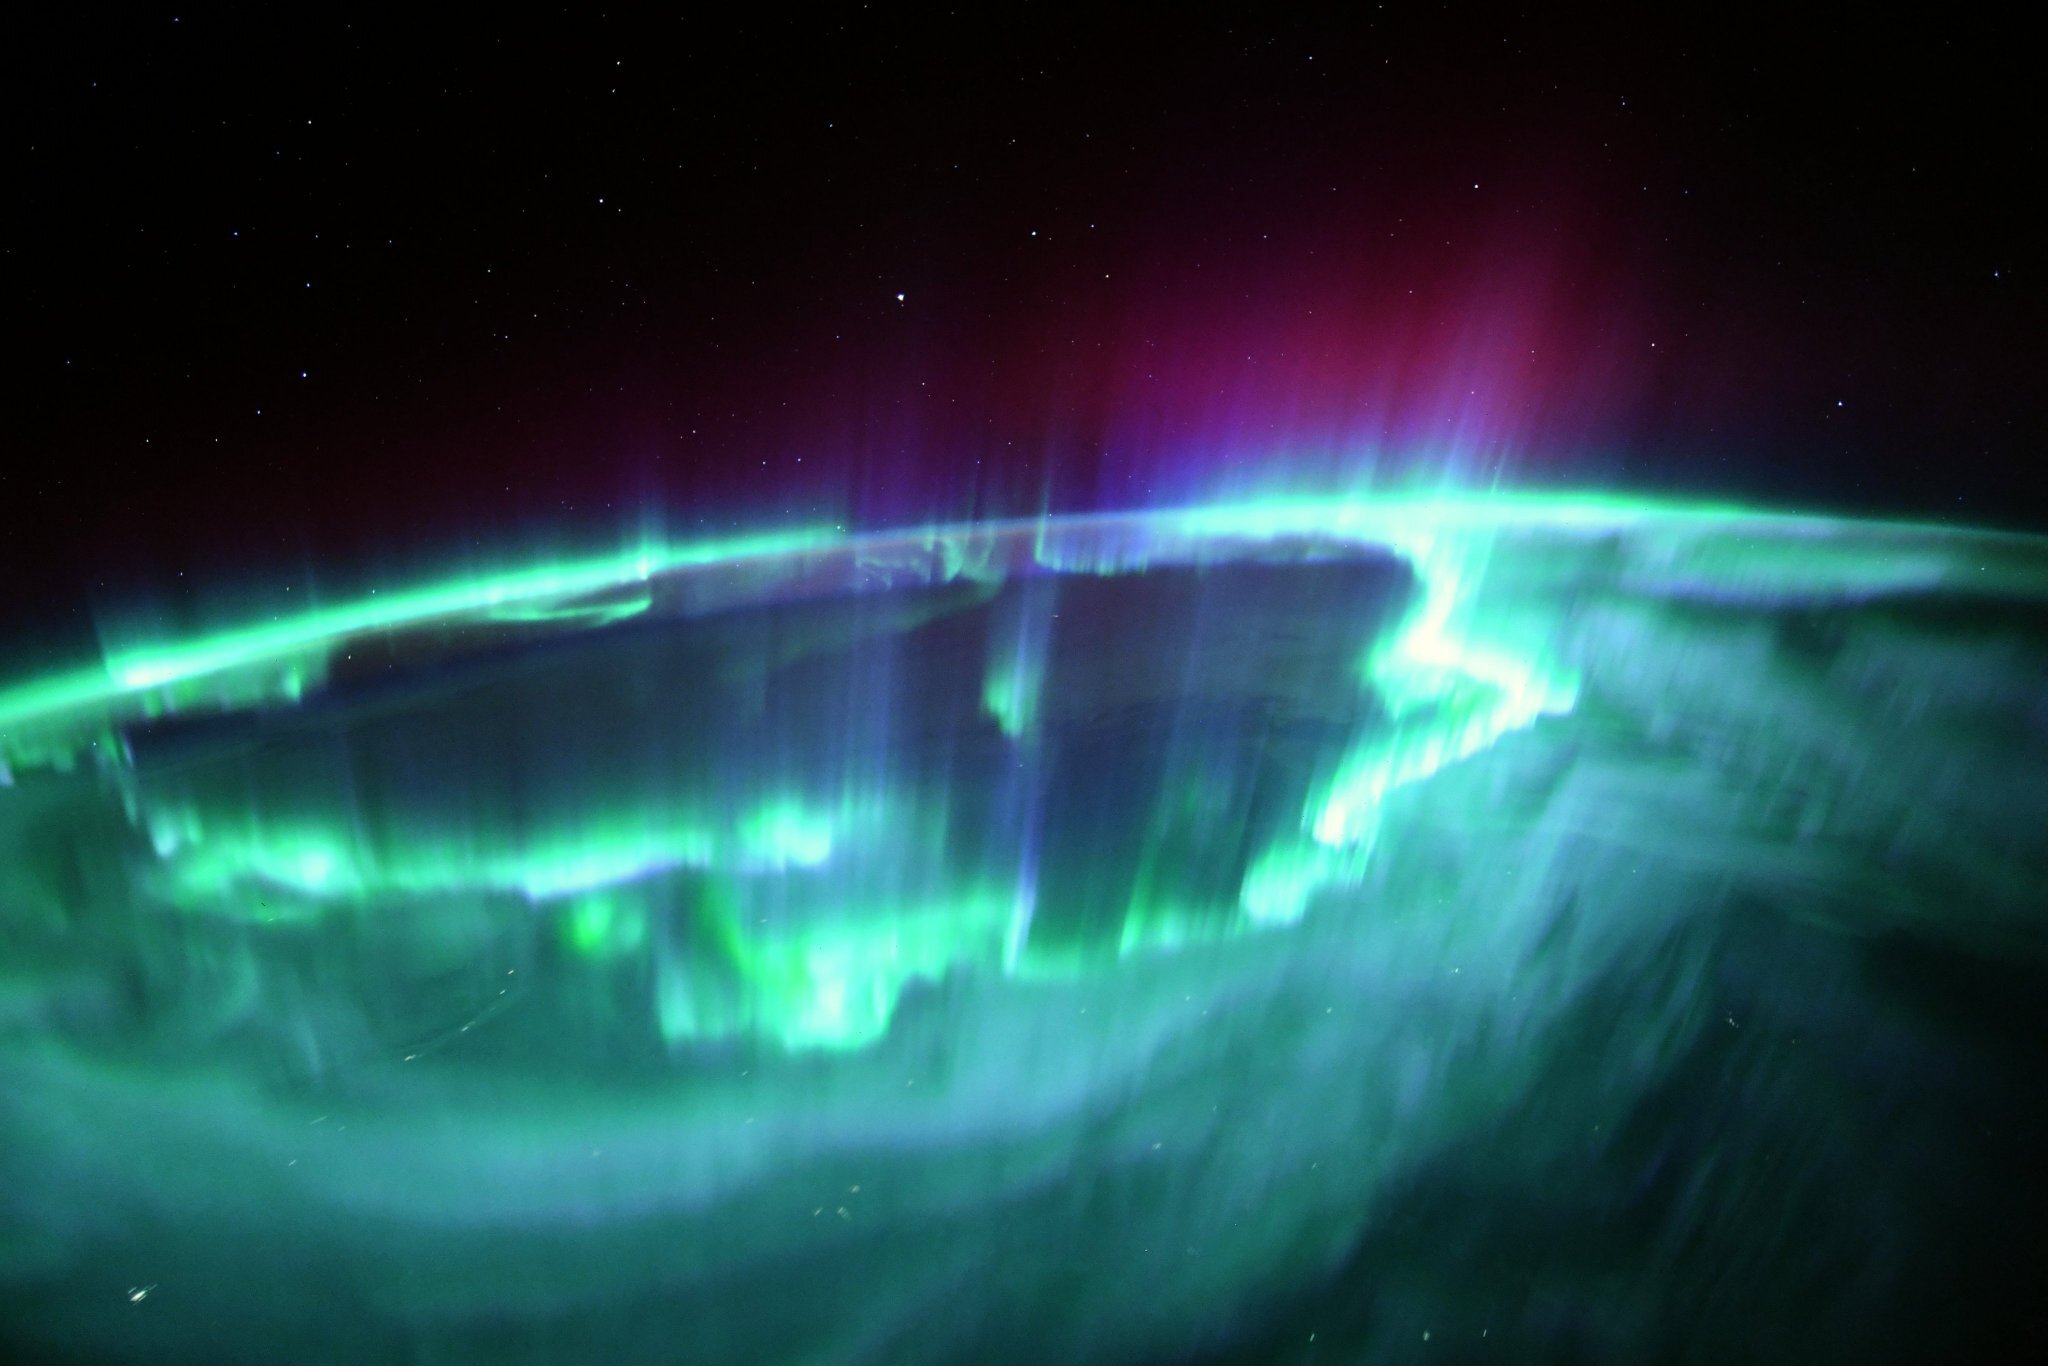 Astronaut Thomas Pesquet captued this incredible image of the auroras from space. Credit: ESA/Thomas Pesquet